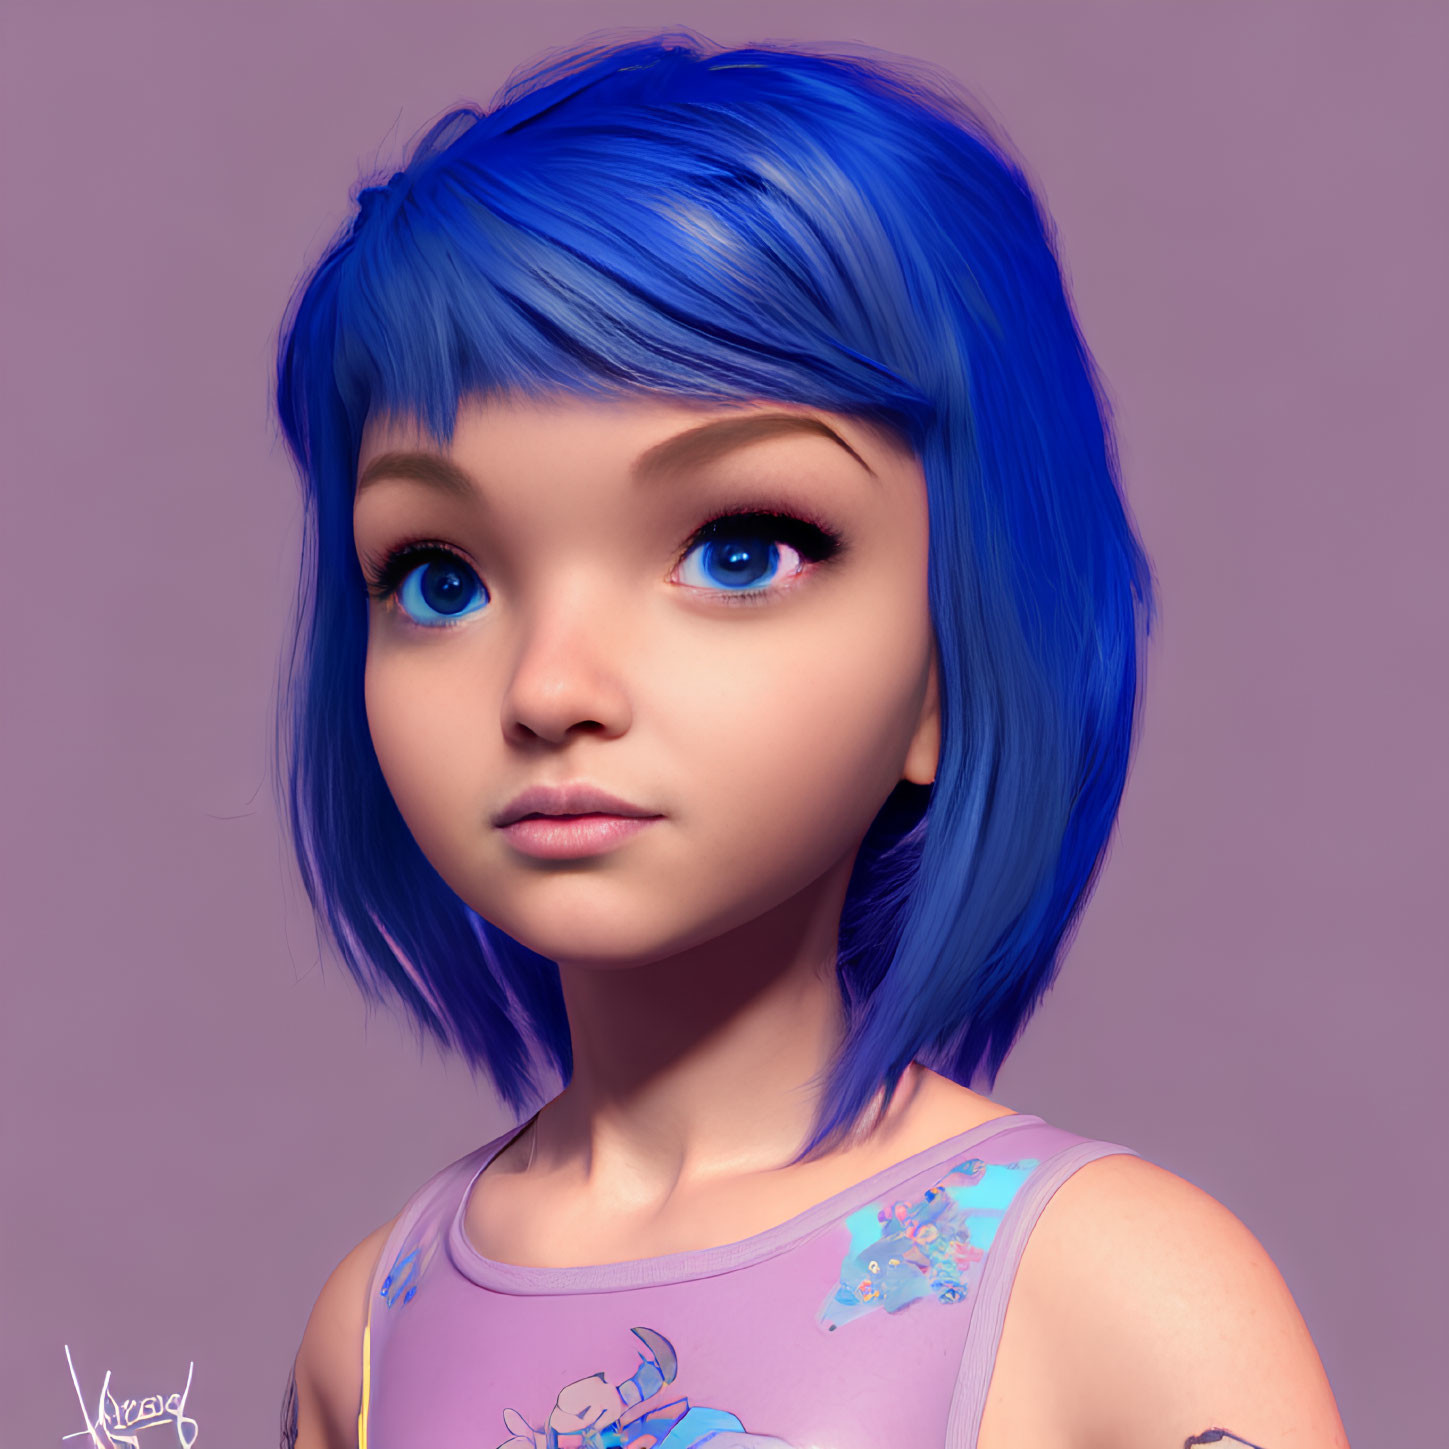 Vibrant blue hair and eyes on a girl in a purple tank top